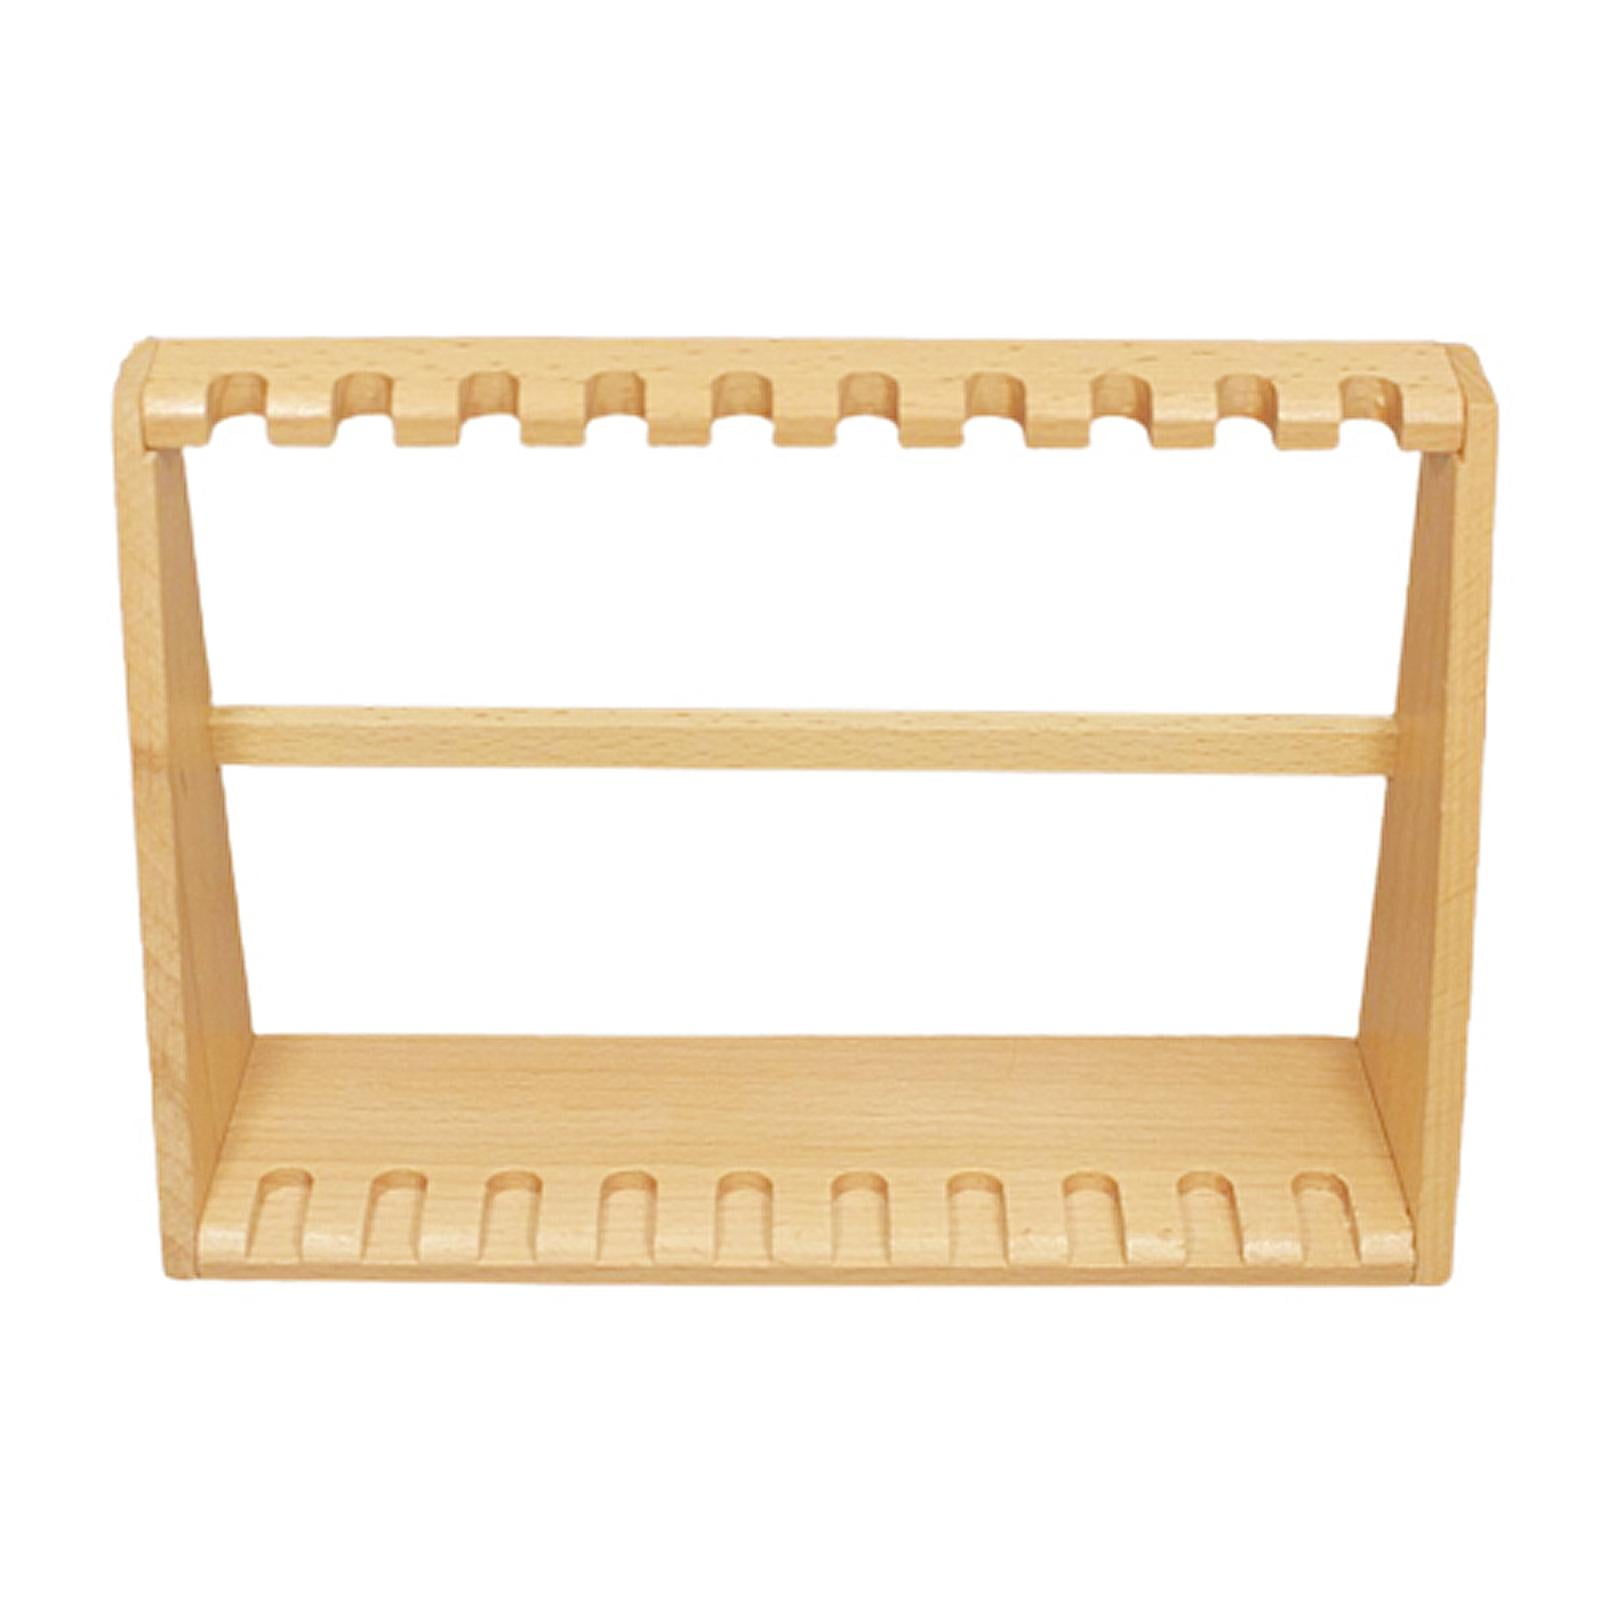 1/6 Wood Stand Military Equipment Rack Accessories Fit Rifle Rack Model Gun Toy 